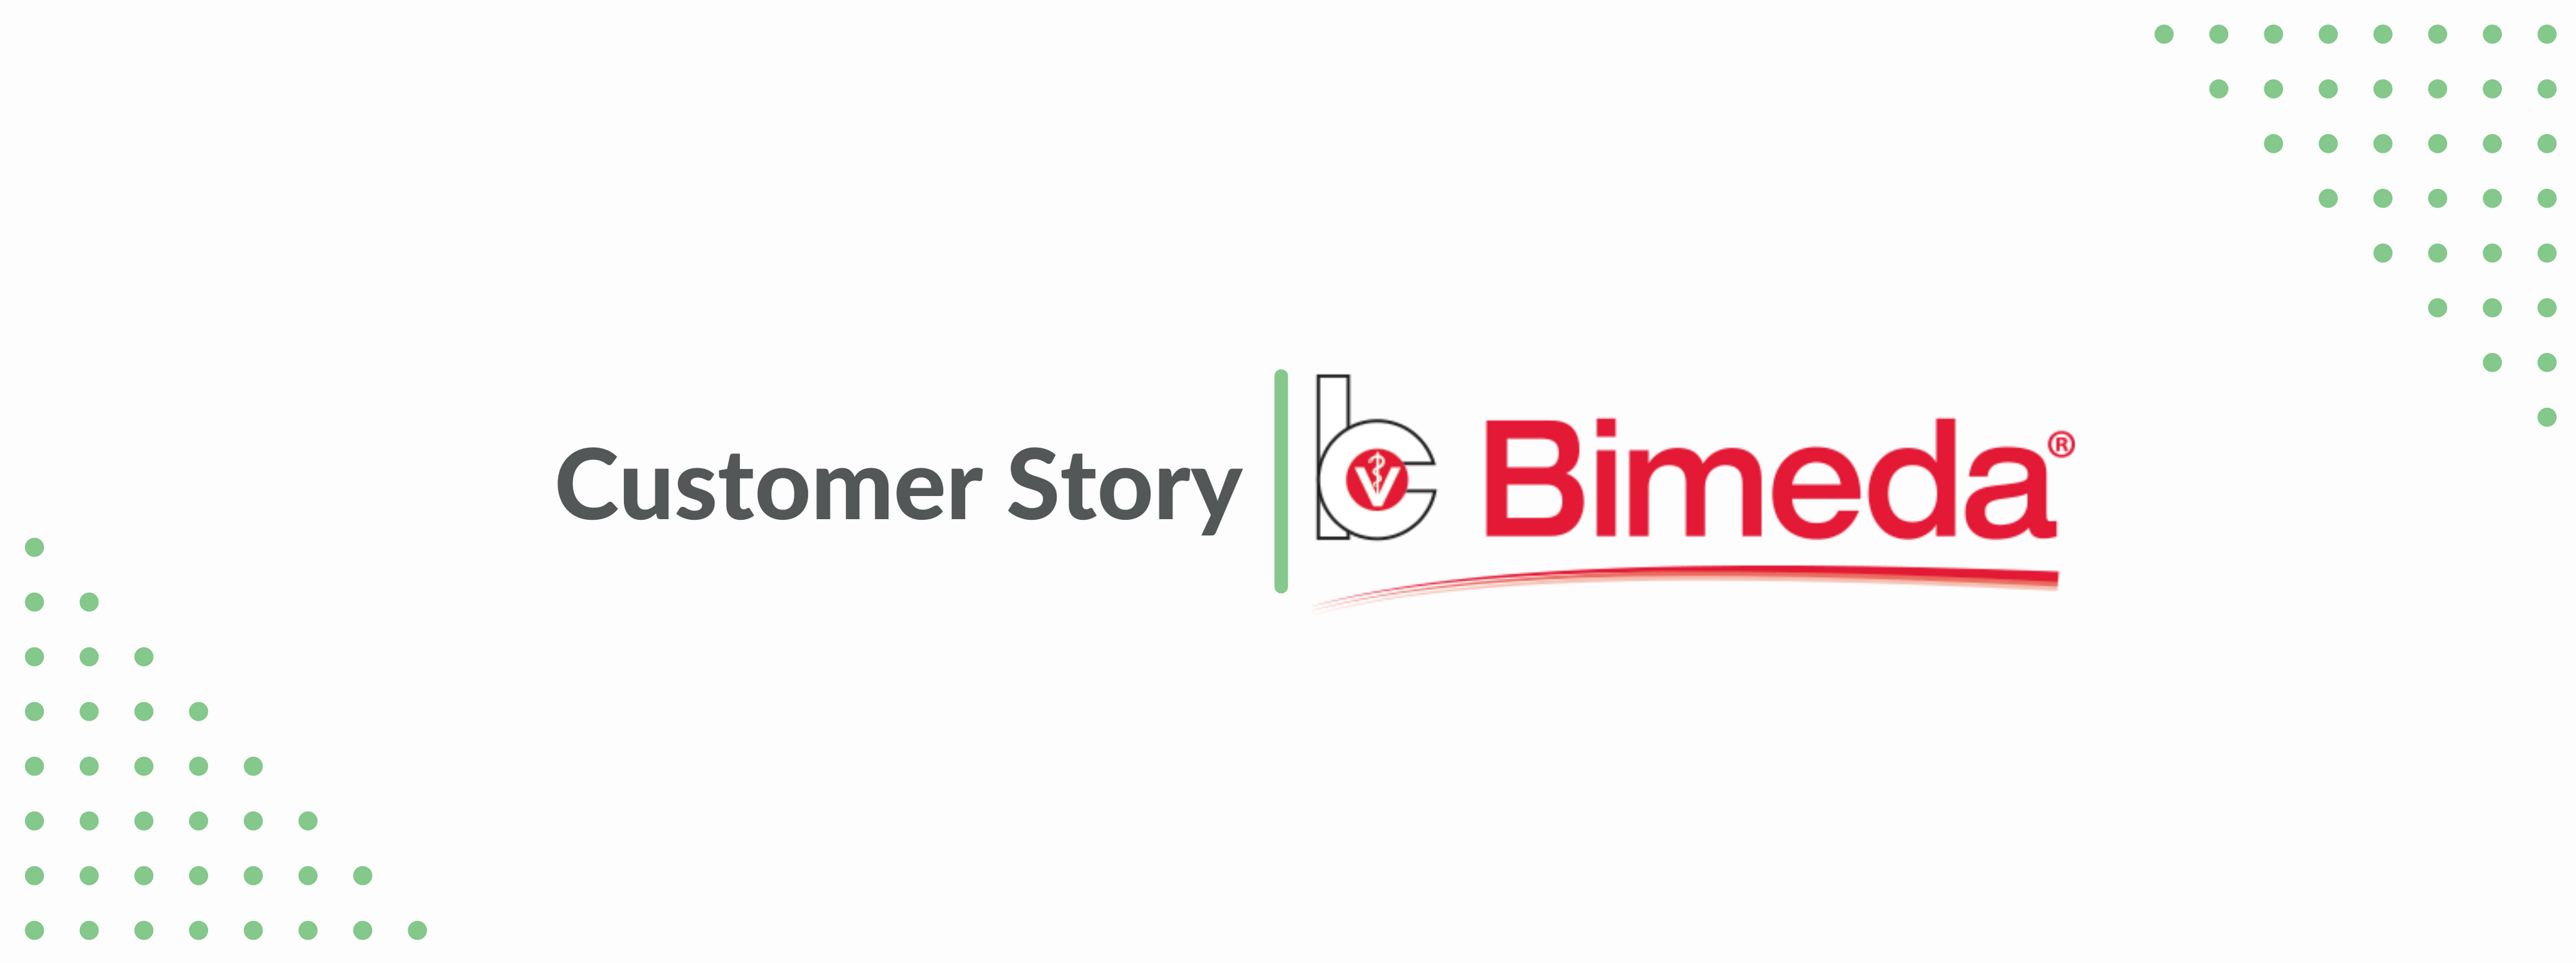 Pharmaceutical Manufacturer Bimeda Utilizes ZenQMS to Support its Culture of Continuous Improvement